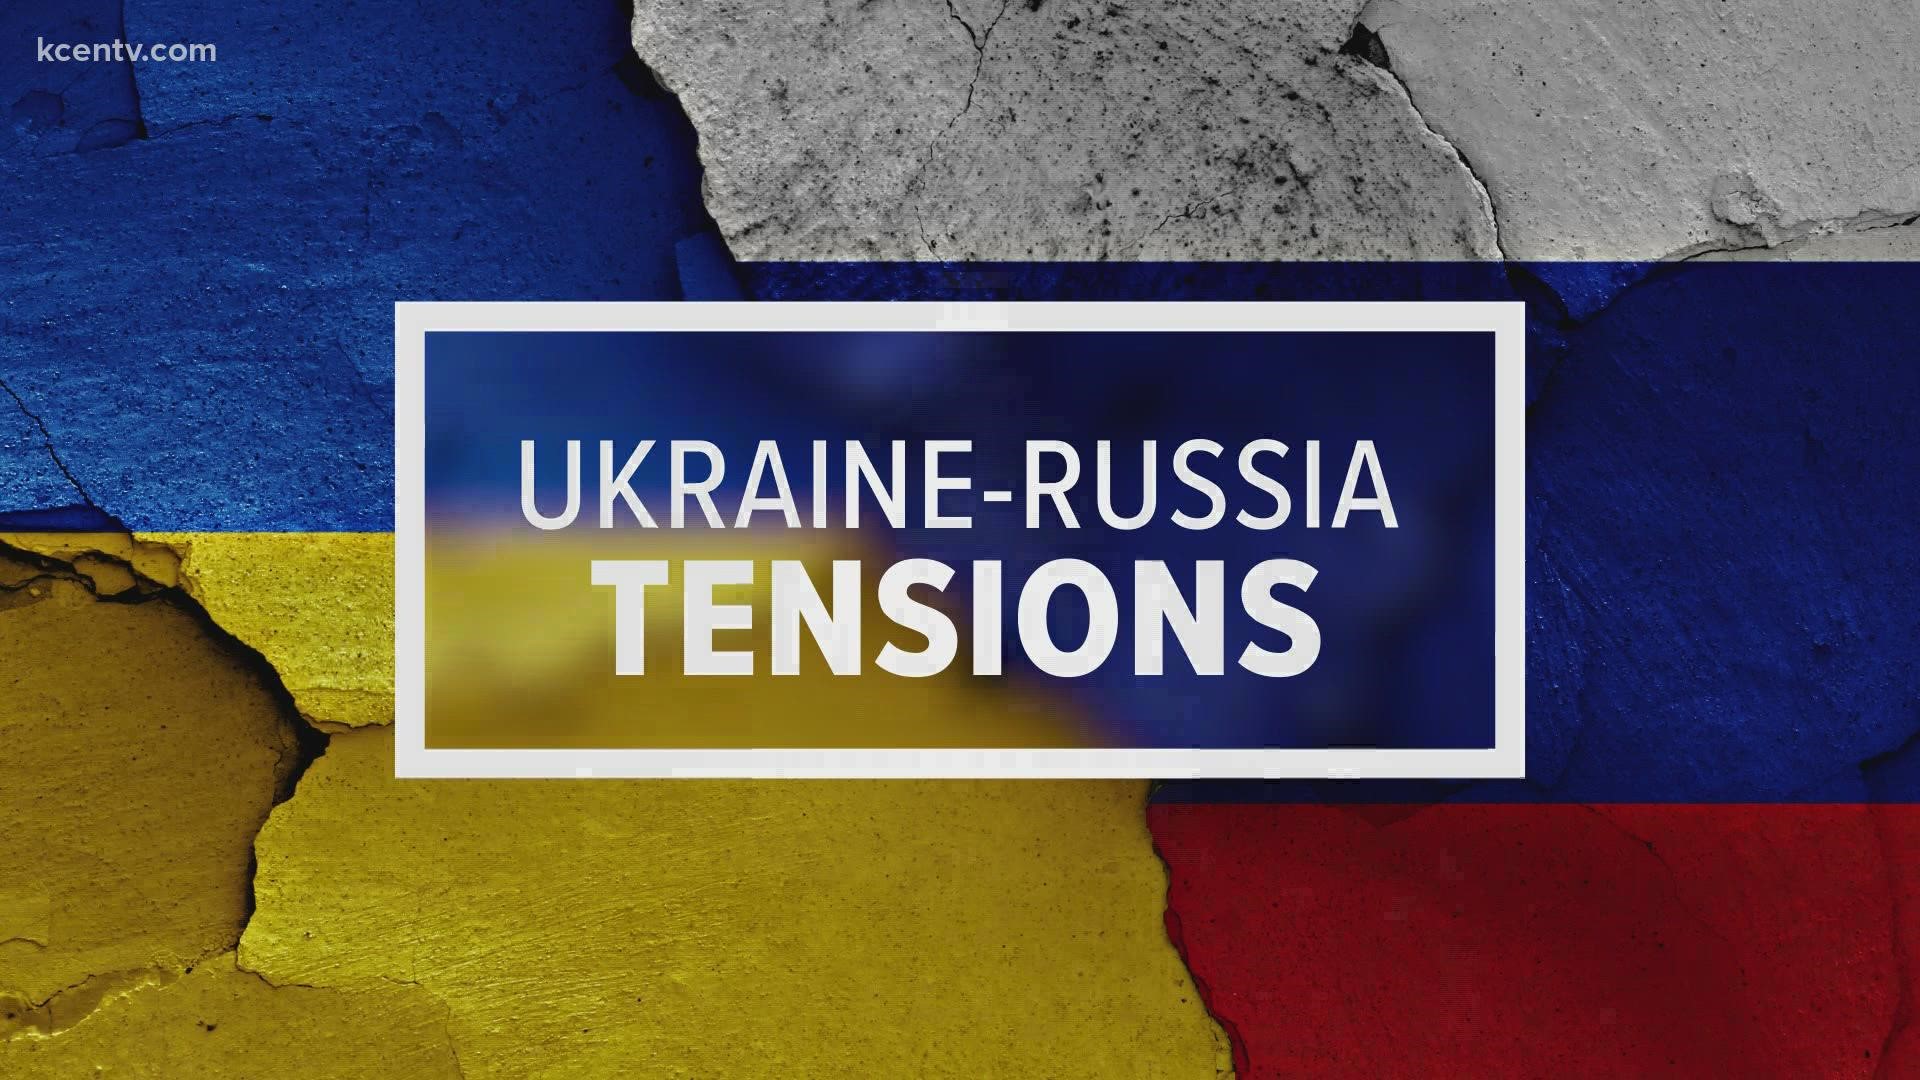 The US has already begun placing sanctions against Russia as they plan to met with Ukraine promise minister.